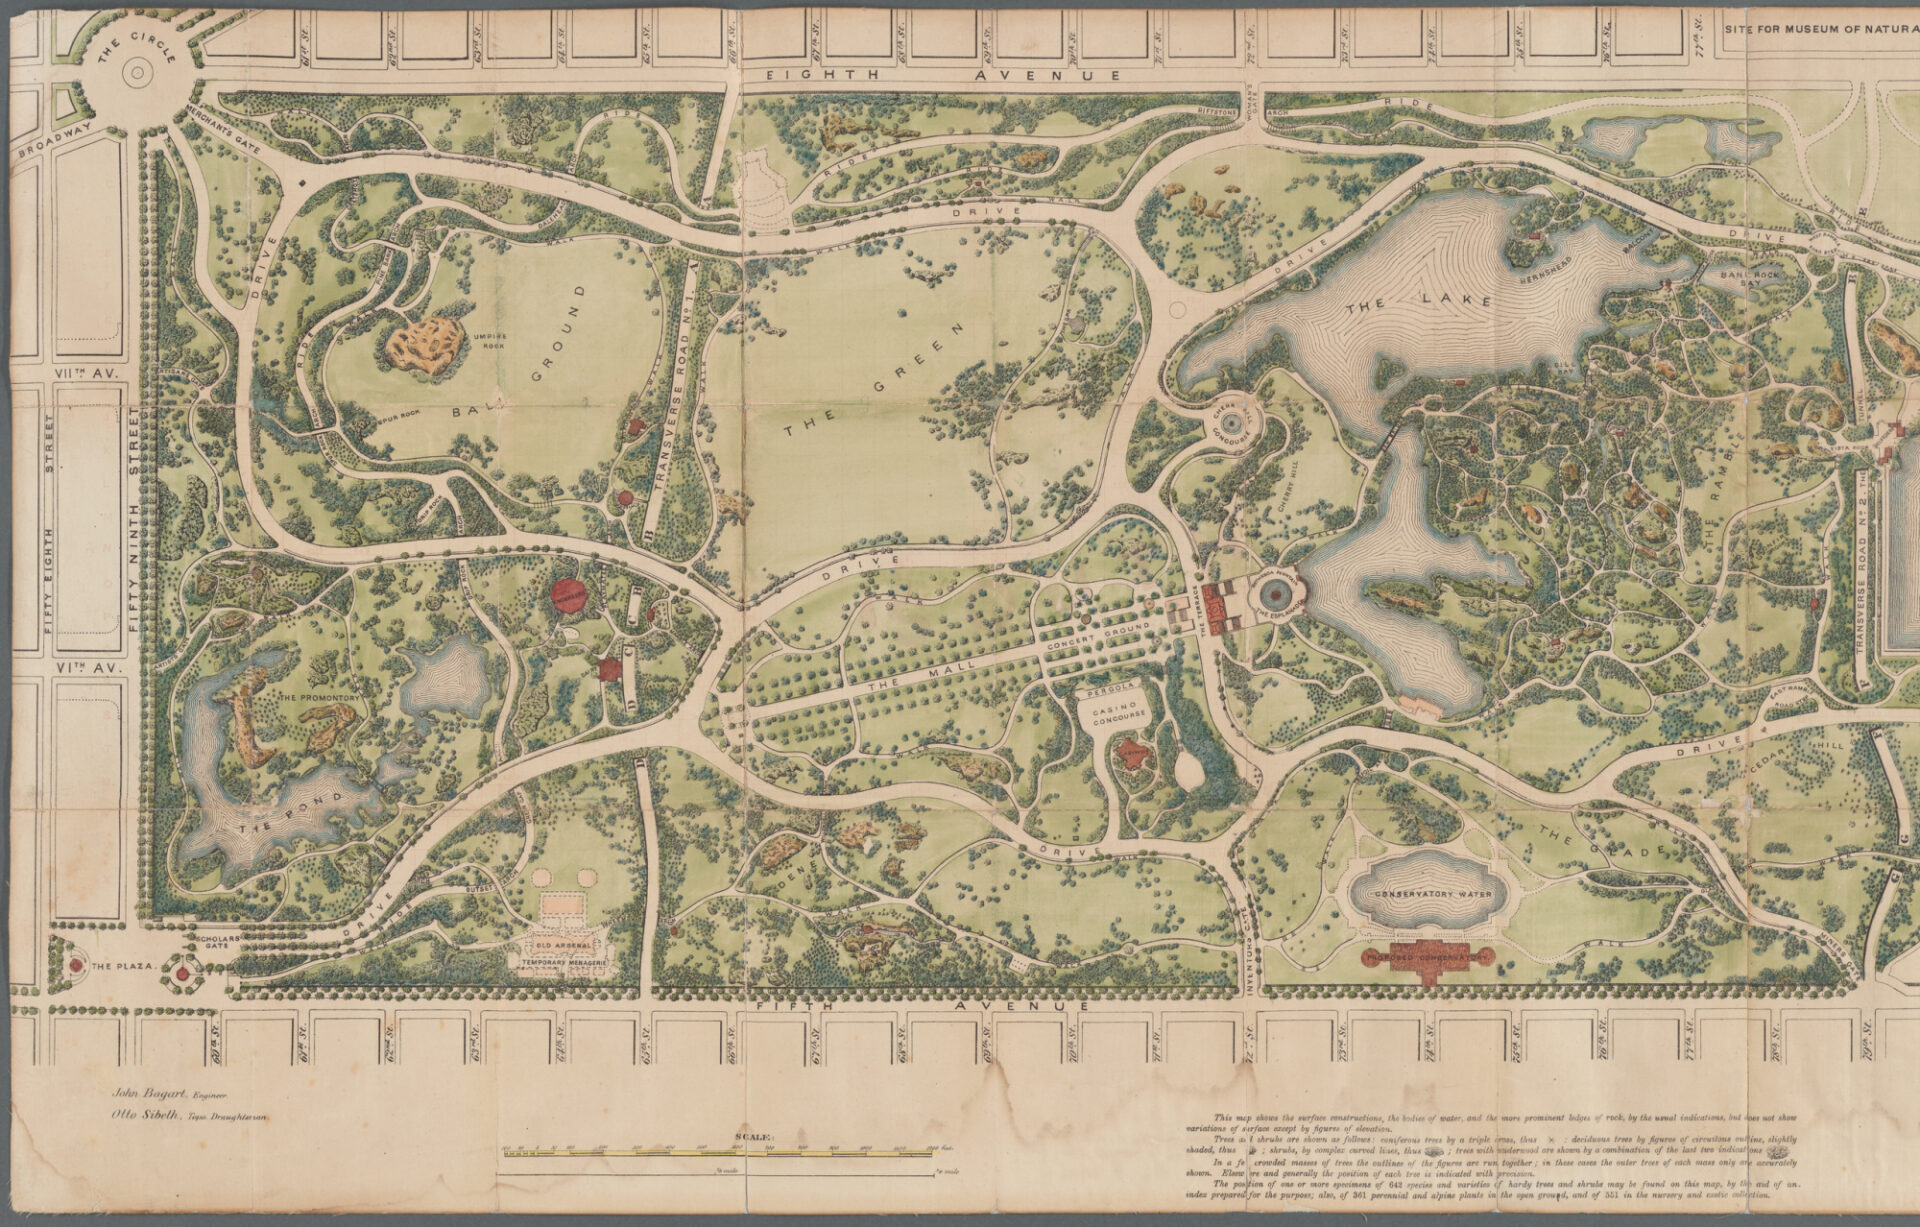 part of 1870 central park map